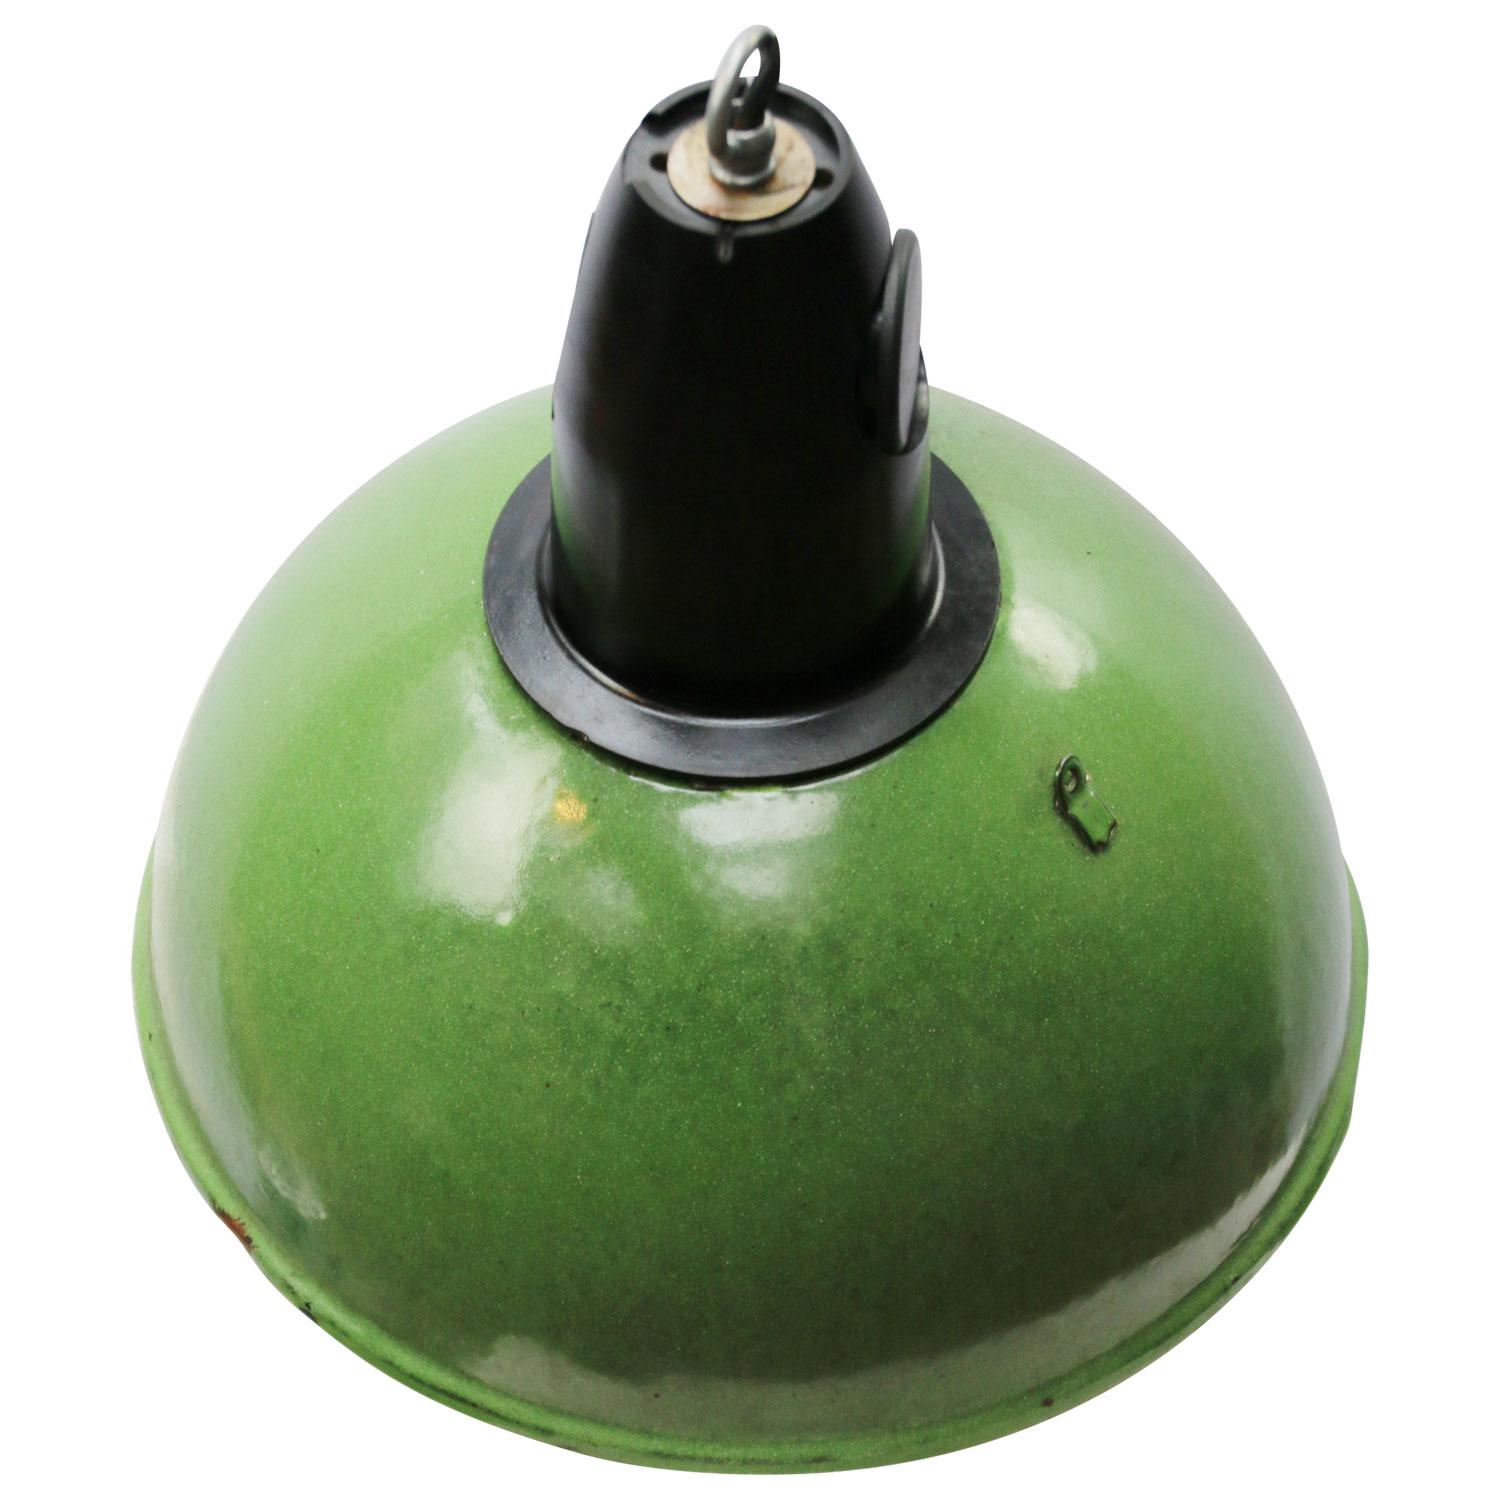 Vintage industrial lamp made of green enamel with Bakelite top. white interior

Weight: 1.50 kg / 3.3 lb

Priced per individual item. All lamps have been made suitable by international standards for incandescent light bulbs, energy-efficient and